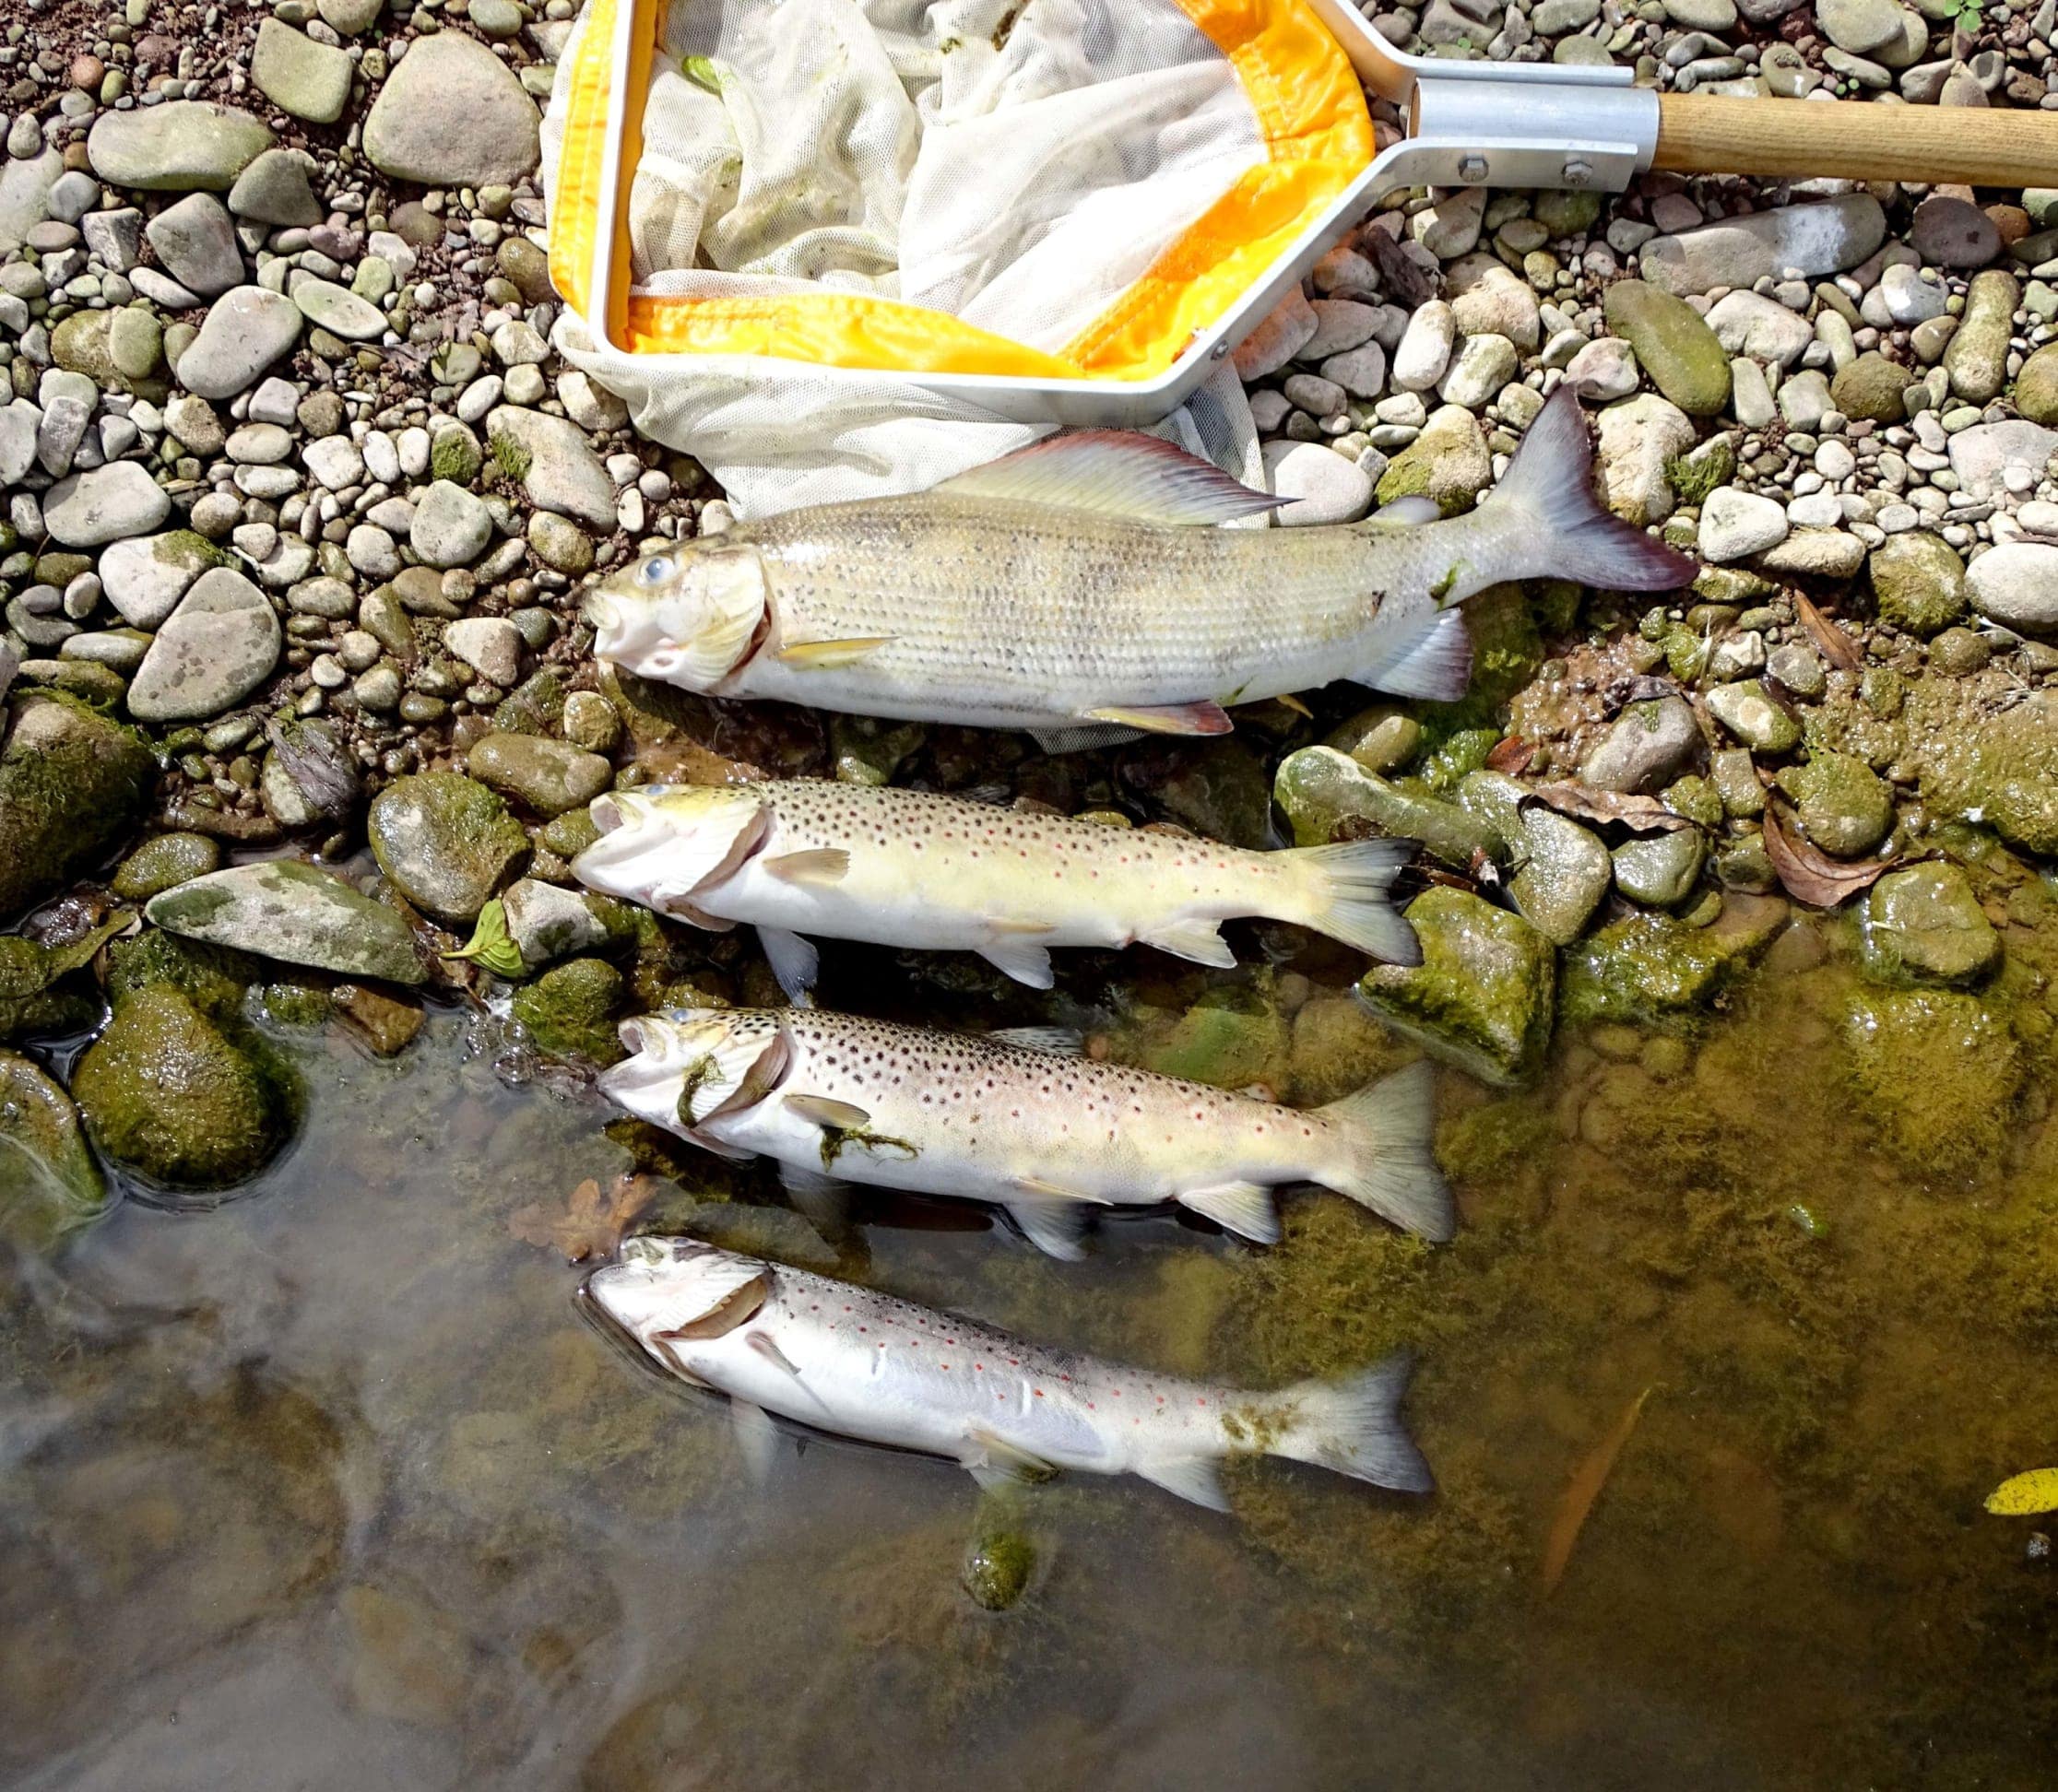 Some of the dead trout and grayling from the Llynfi on Saturday.